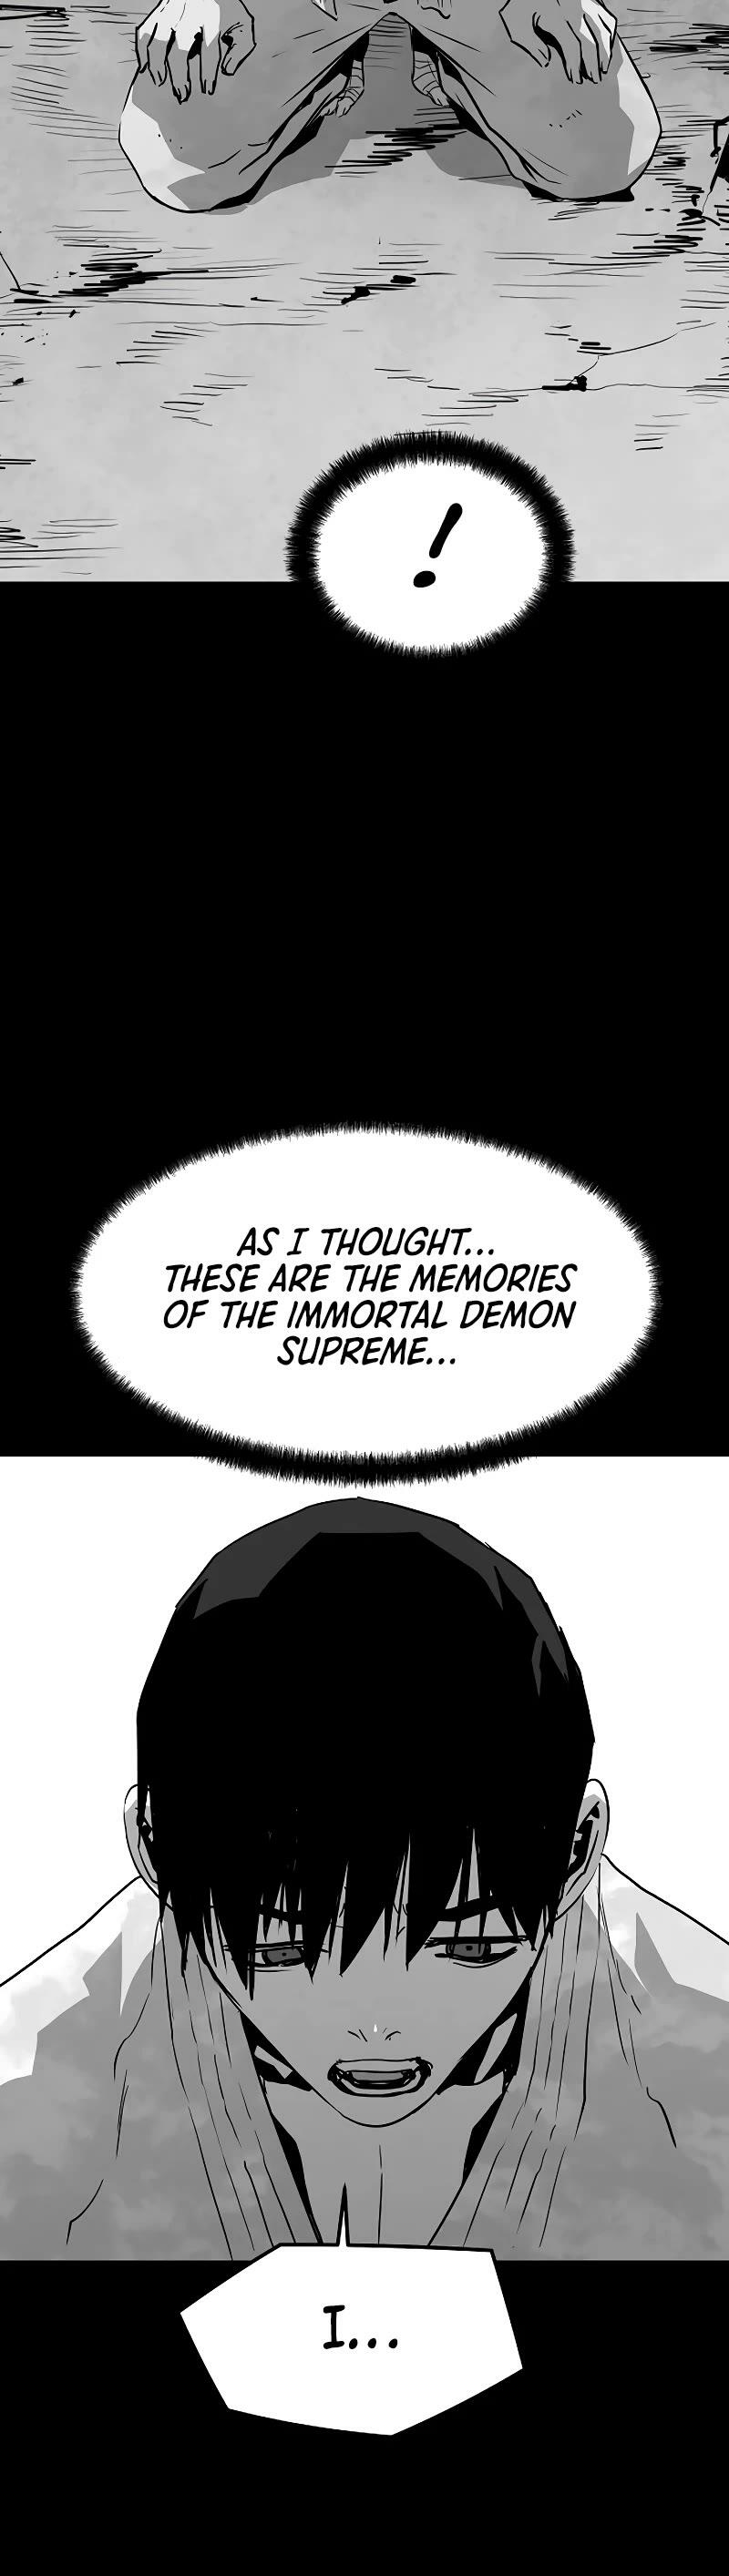 The Breaker: Eternal Force Chapter 96 page 32 - 